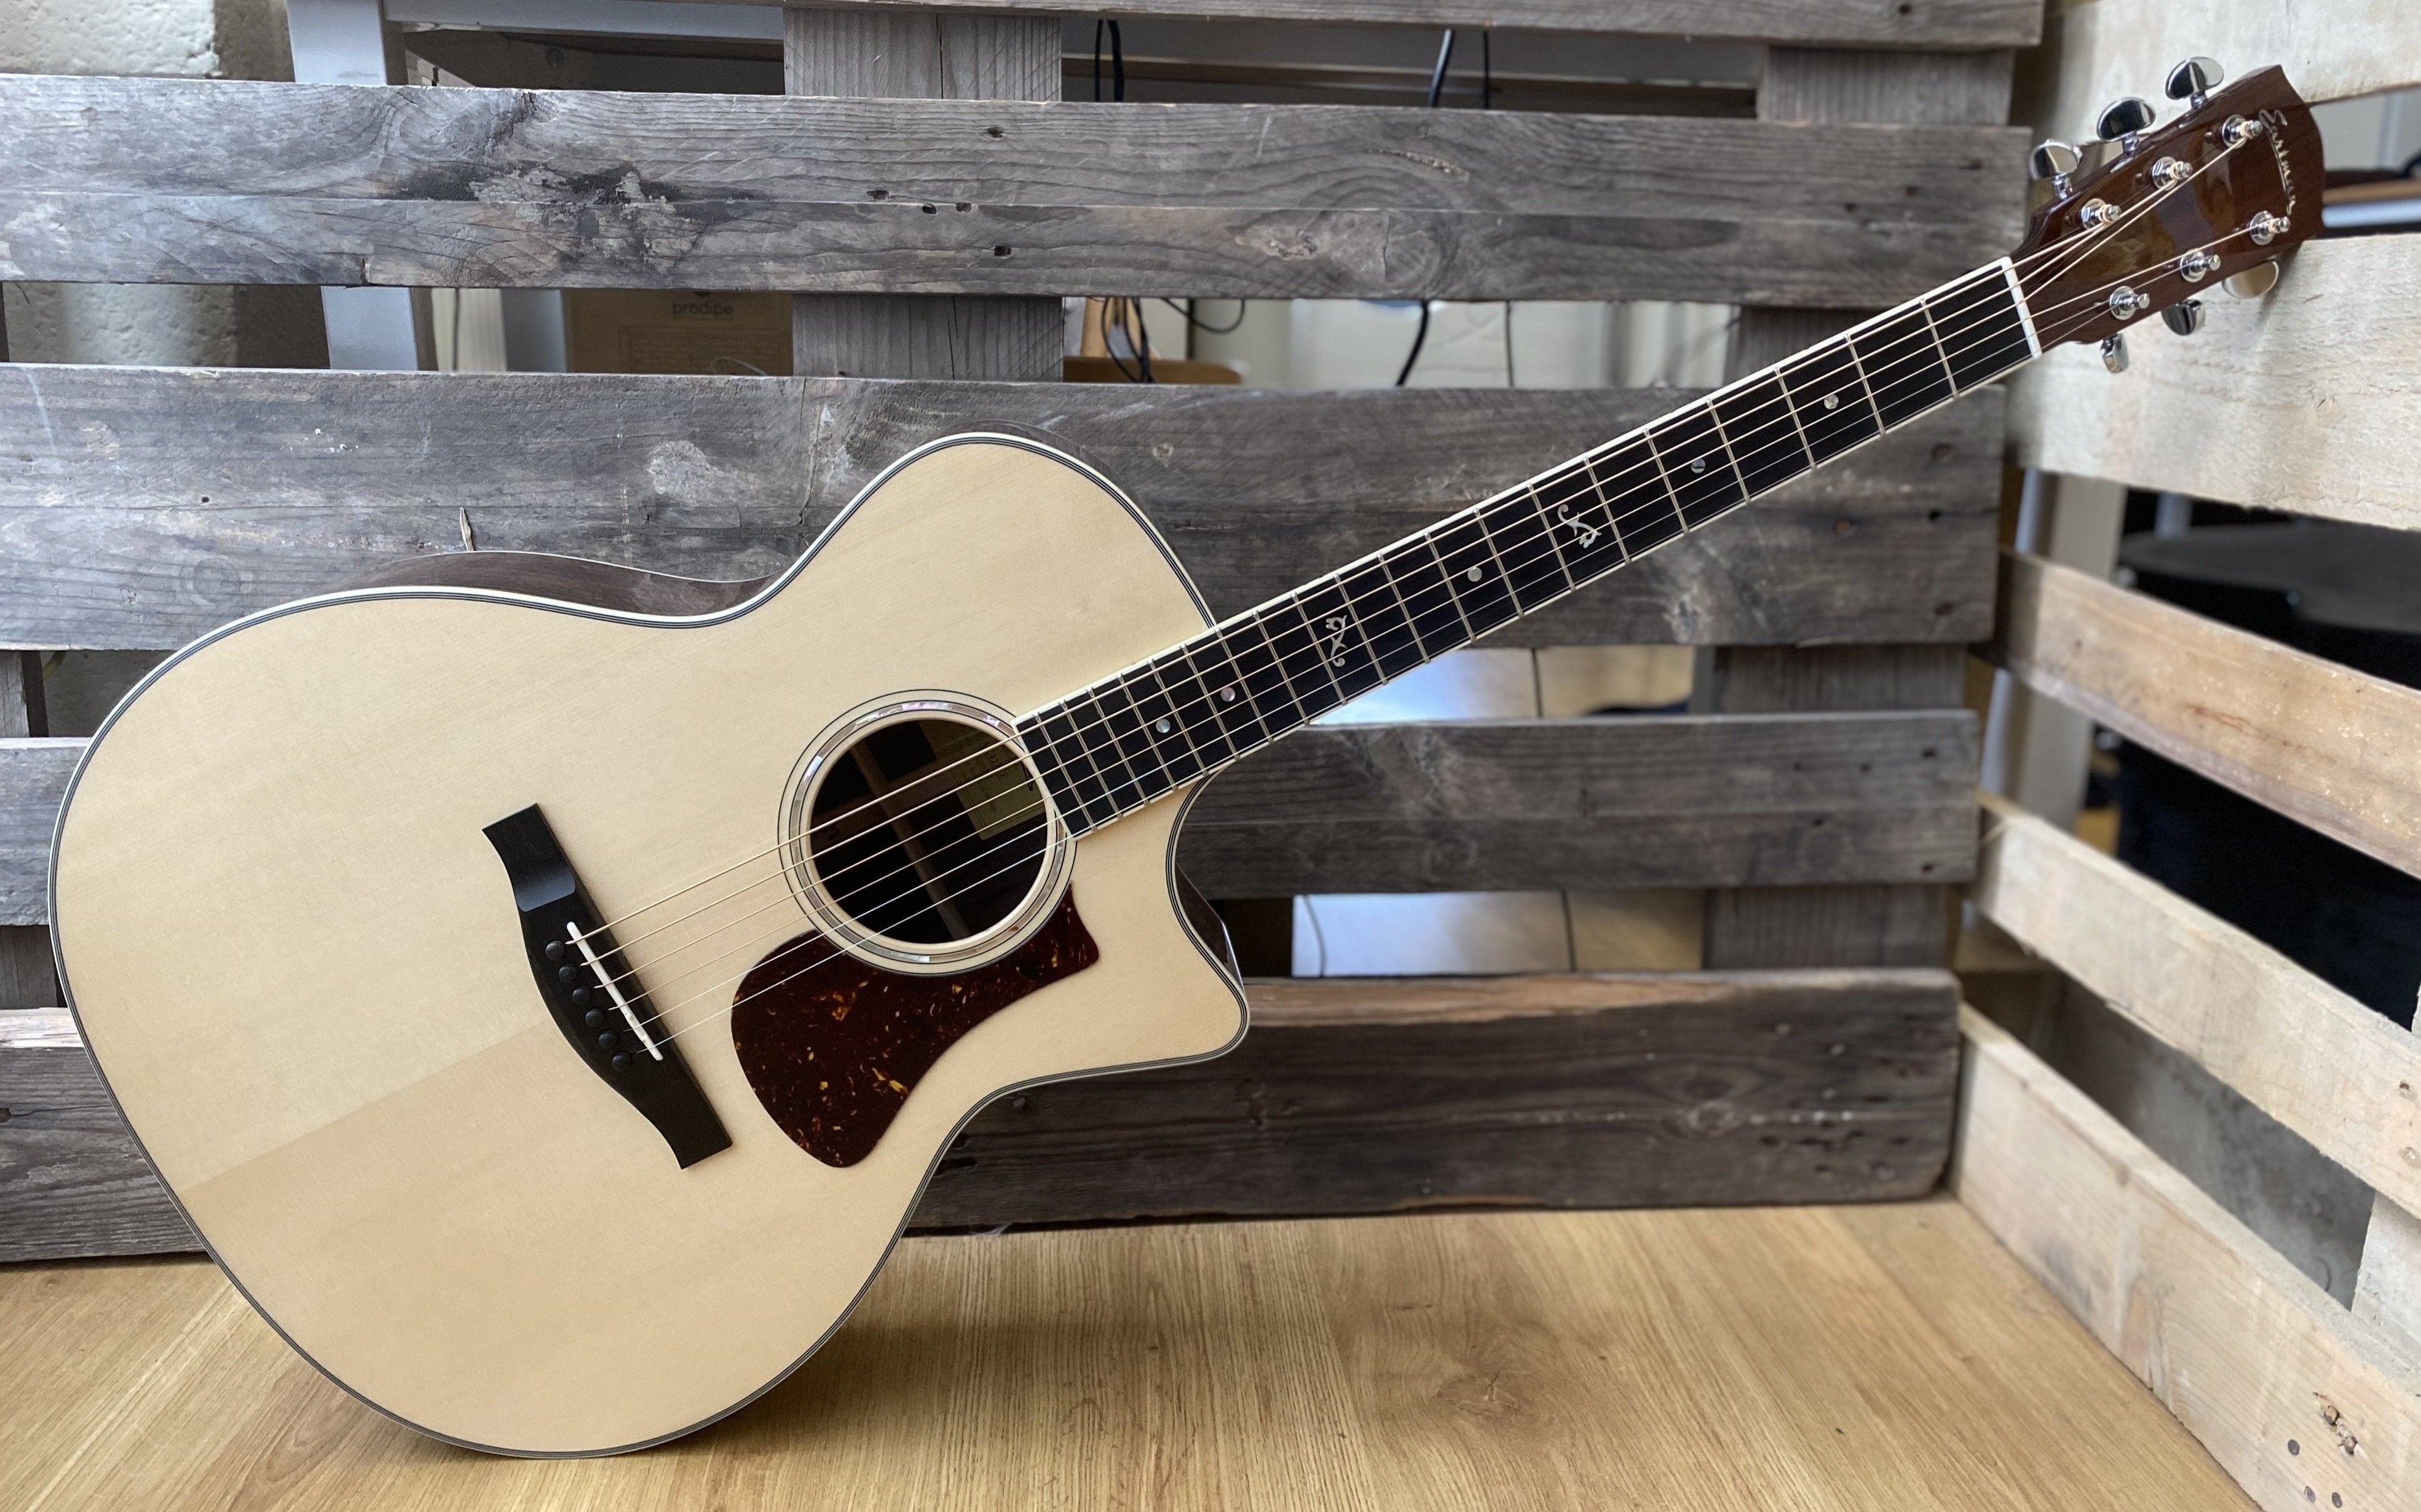 Eastman AC422CE Grand Auditorium Electro Acoustic Guitar w/ cutaway and LR Baggs VTC, Electro Acoustic Guitar for sale at Richards Guitars.